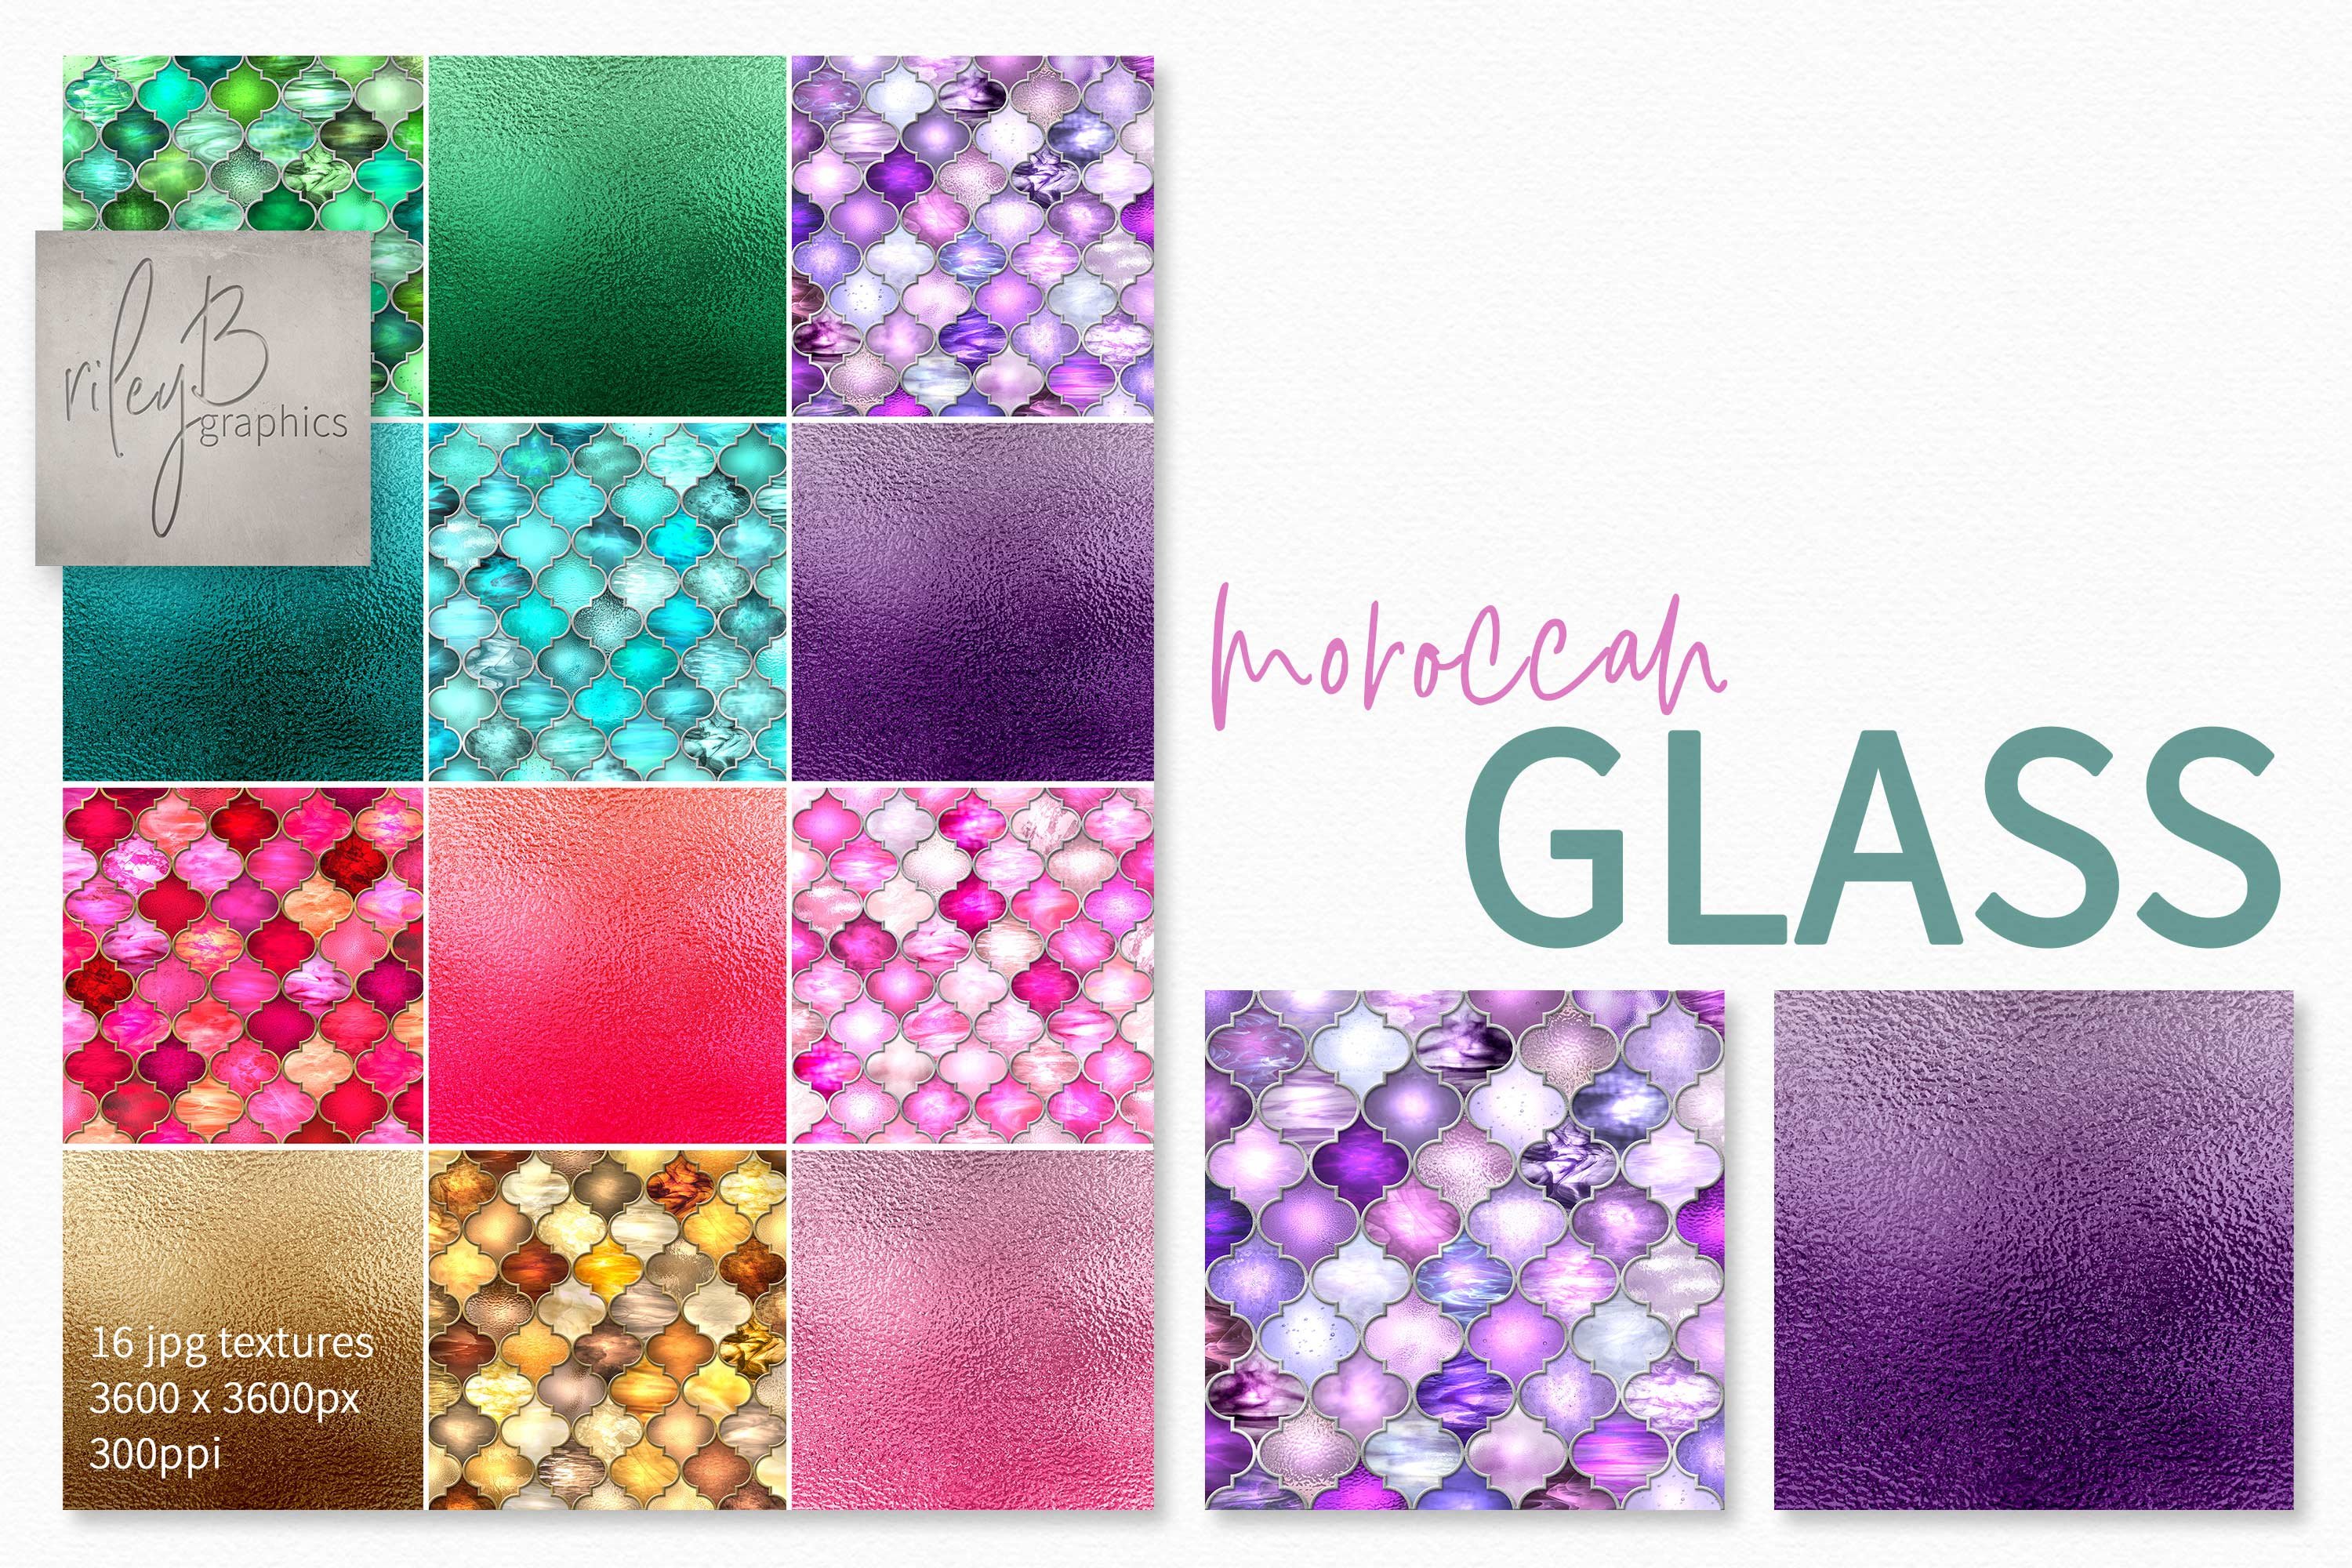 Moroccan Glass Textures cover image.